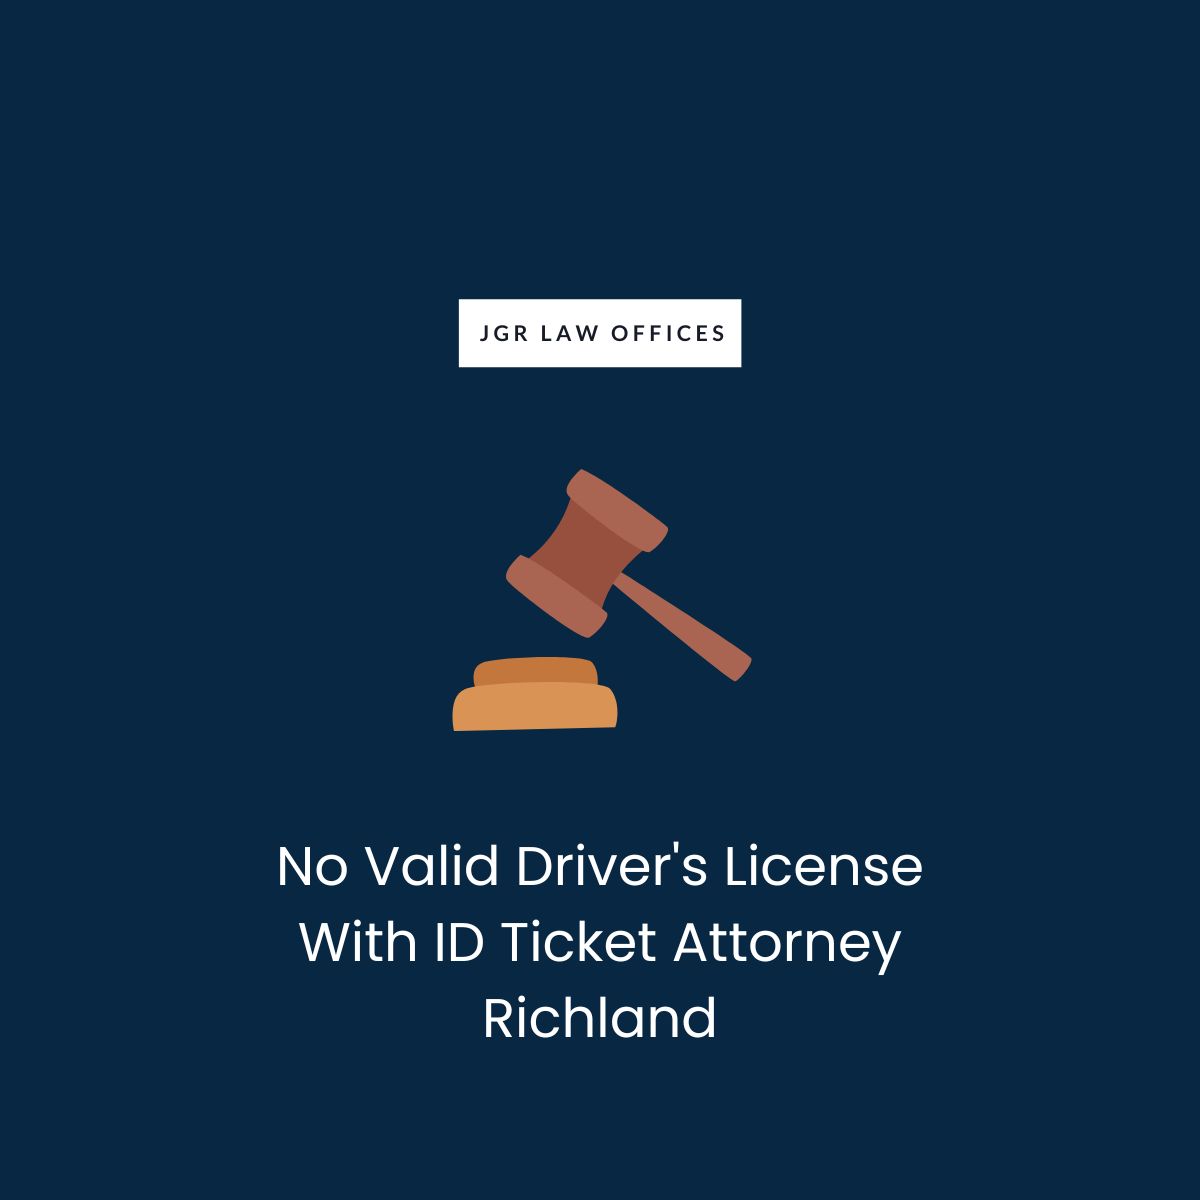 No Valid Driver's License With ID Ticket Attorney Richland